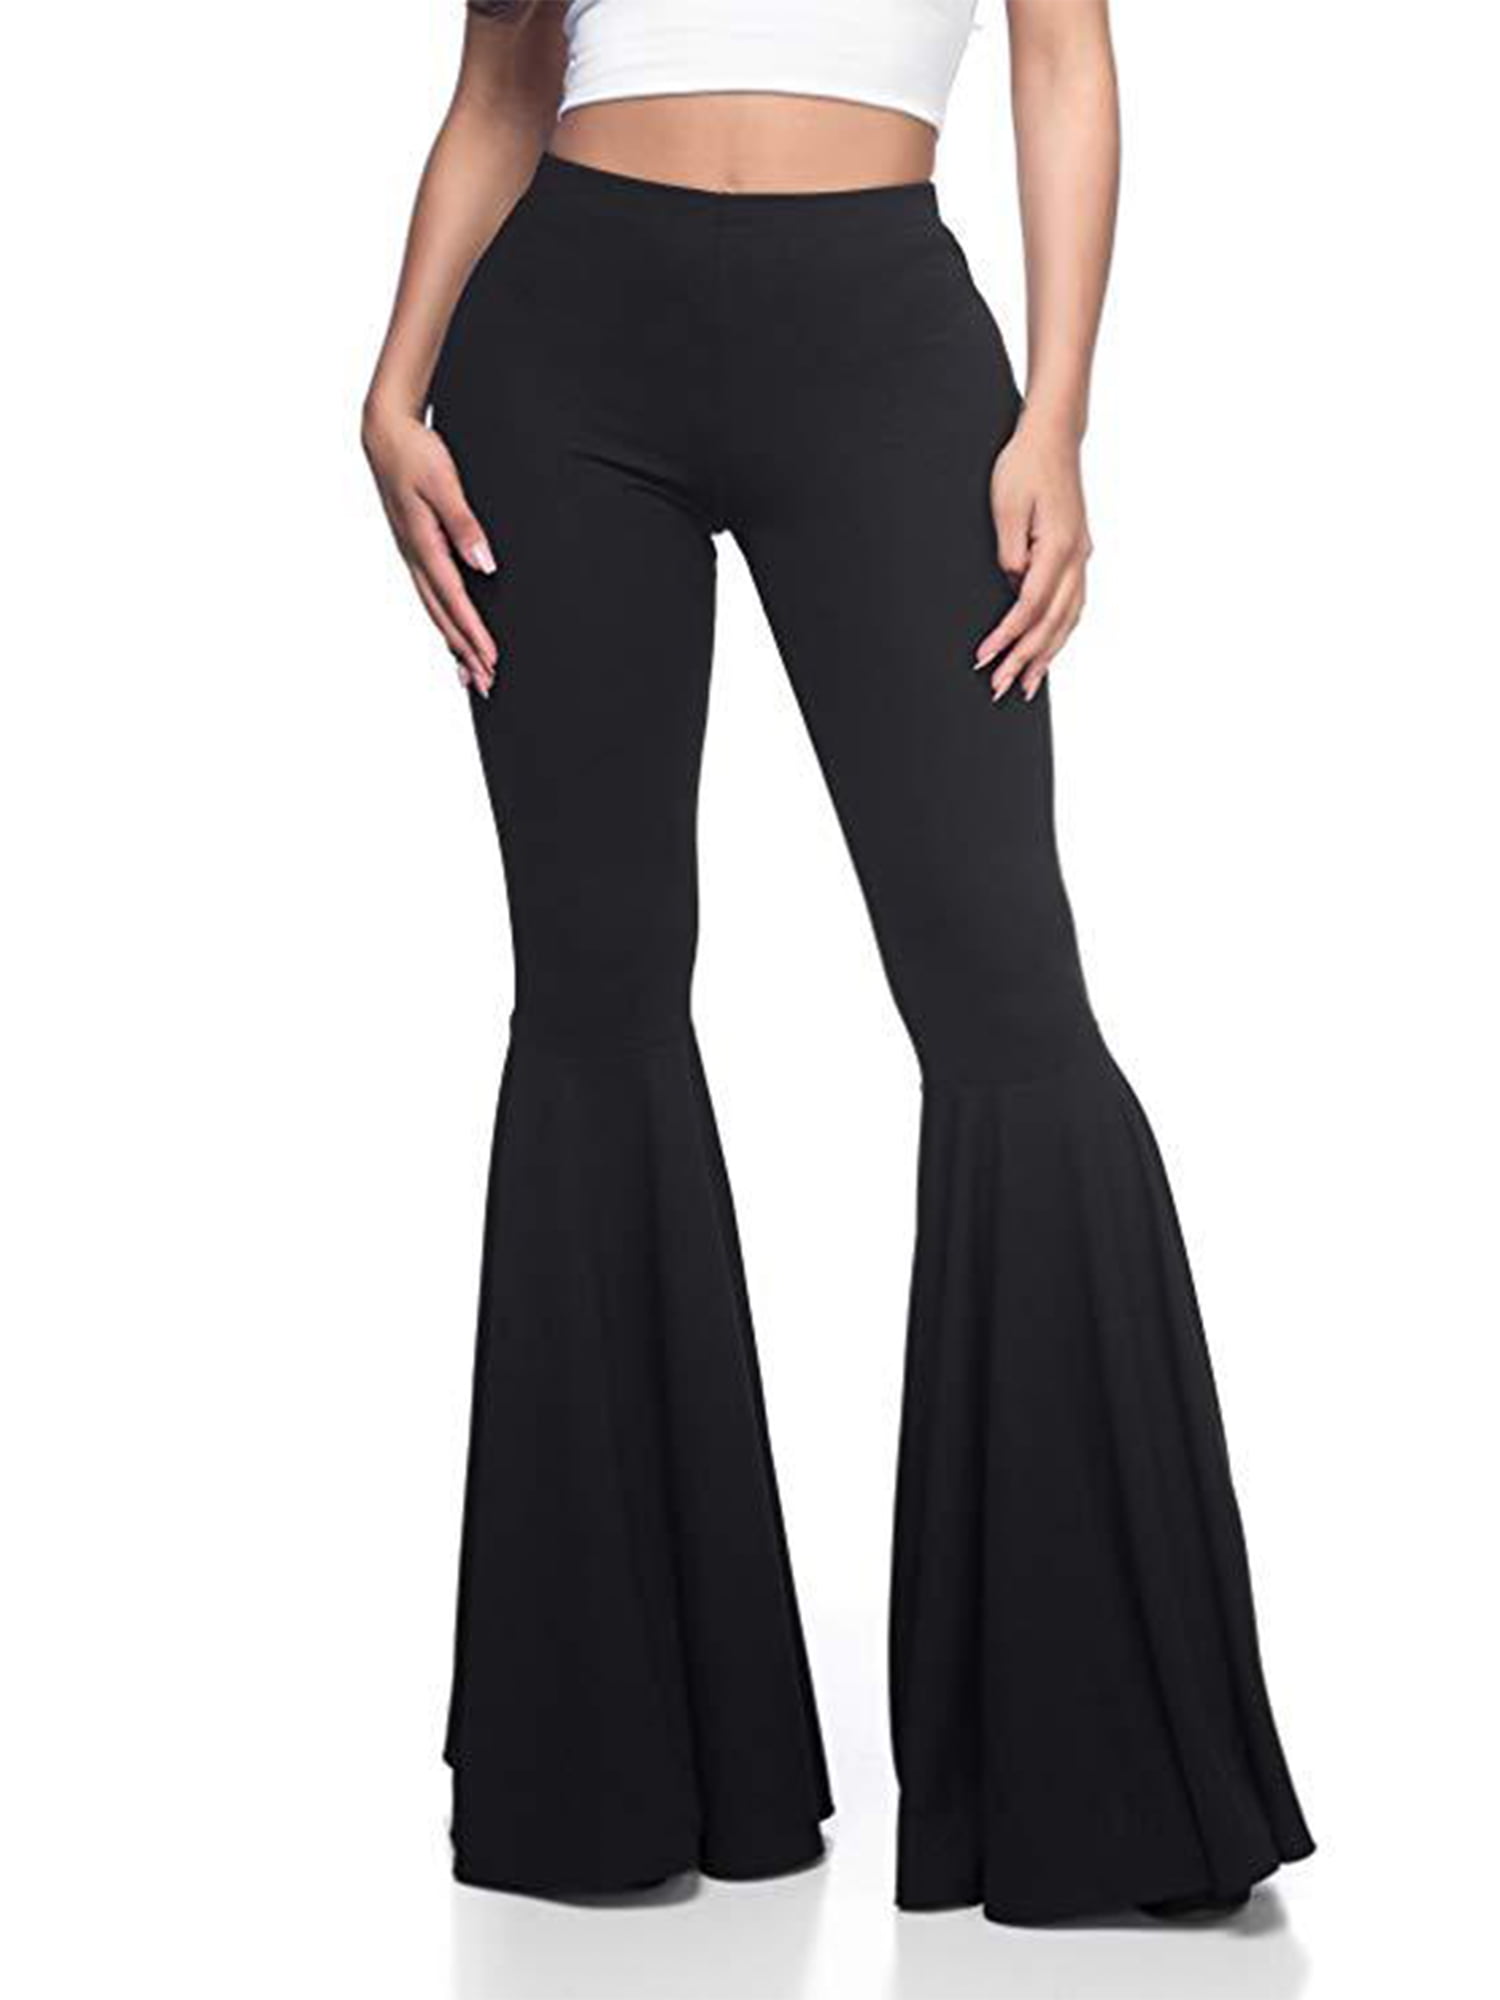 Womens High Waist Skinny Long Pants Ruched Flared Bell-Bottoms Bootcut Trousers 